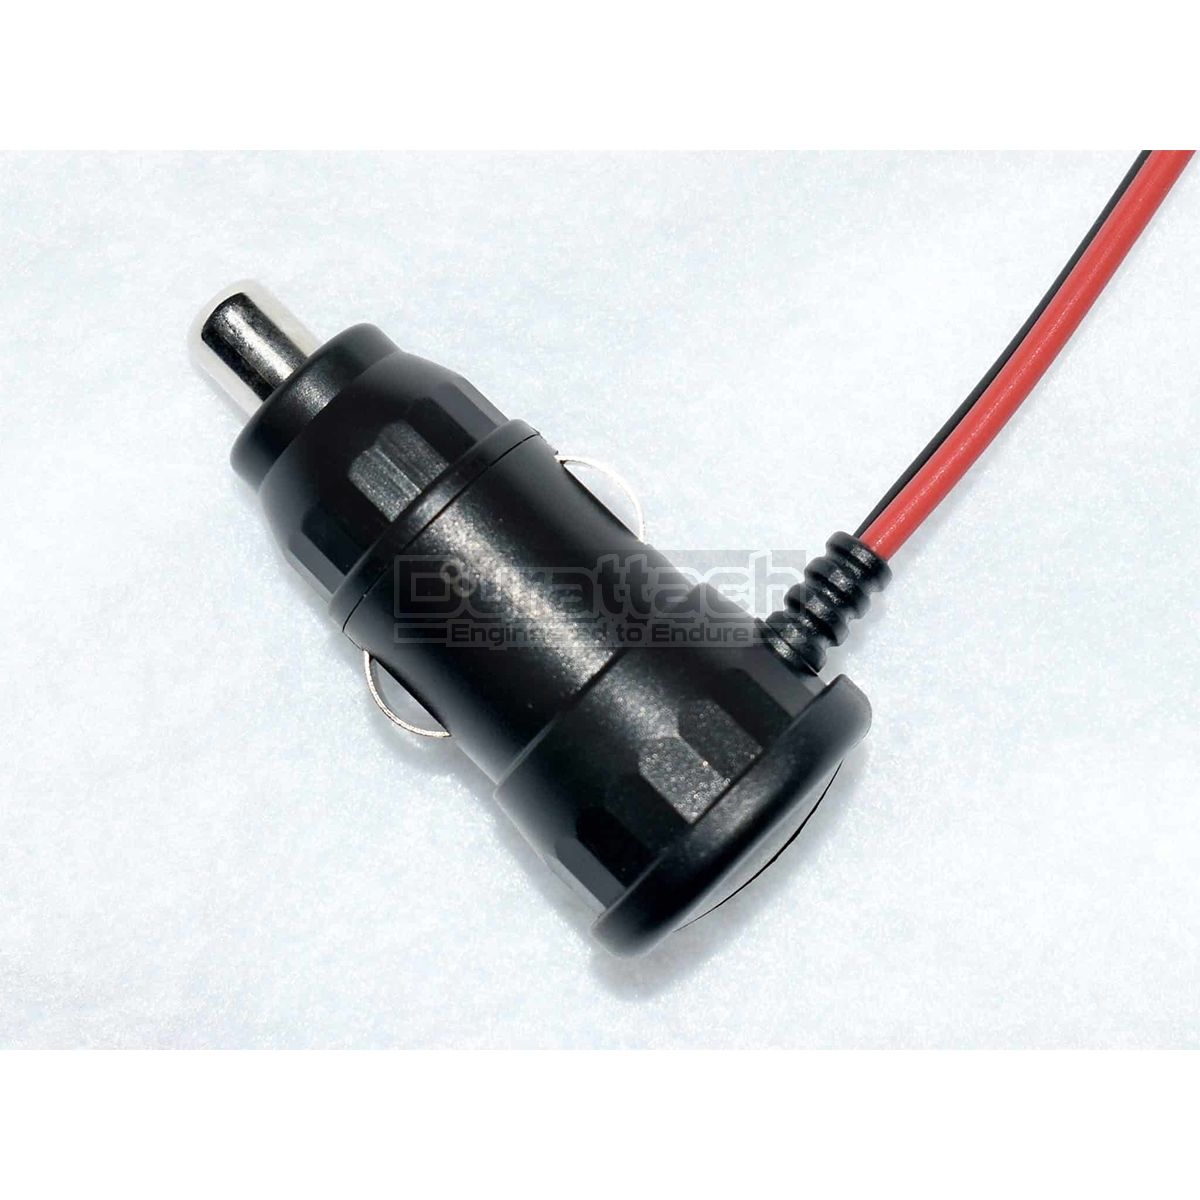 Auxiliary 12V Cigarette Lighter Power Plug Wire Harness Adapter Kit